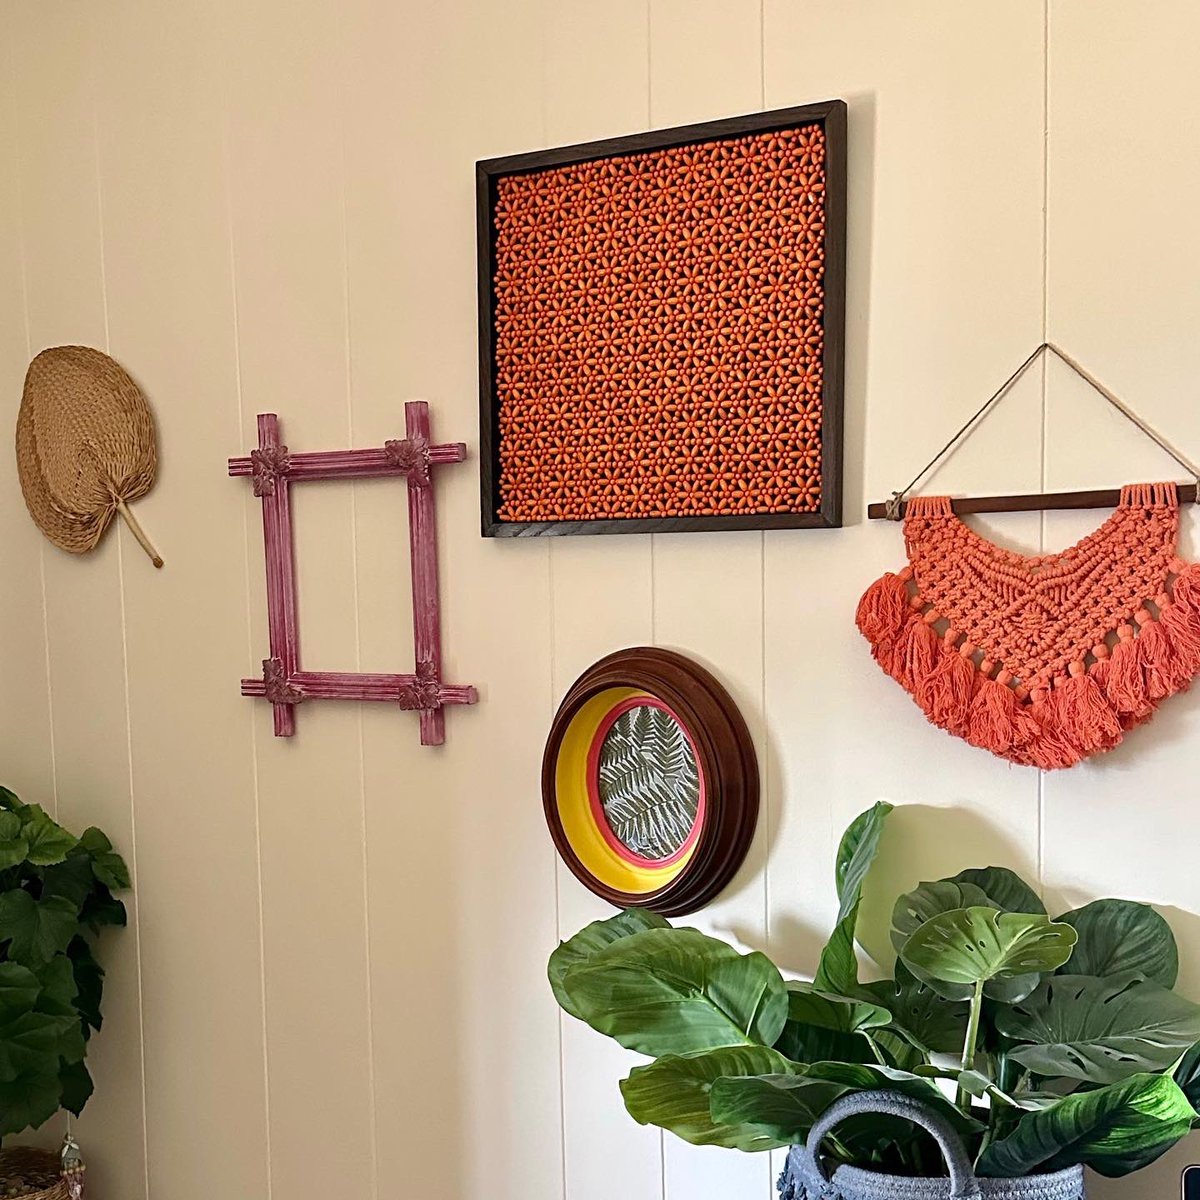 John made a frame for a beaded placemat I thrifted awhile ago. I’m trying to bring more 70s boho vibe into my office. #bohovibes #thrifteddecor #homeoffice